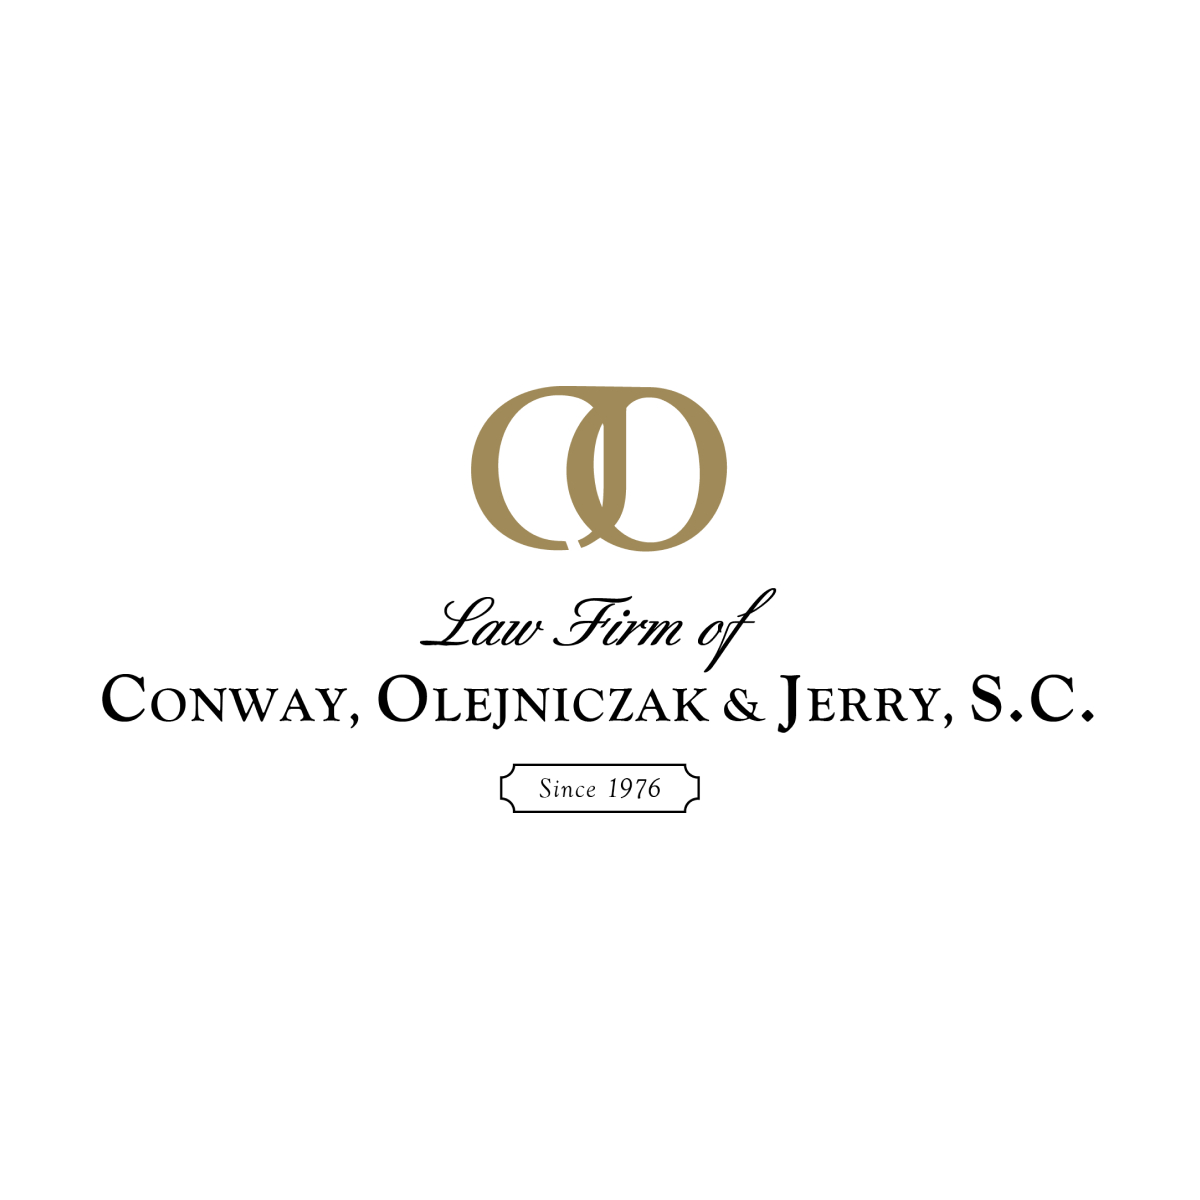 Photo of map[image:/uploads/conway-olejniczak-jerry-logo-with-padding.jpg name:Law Firm of Conway, Olejniczak & Jerry, S.C.]